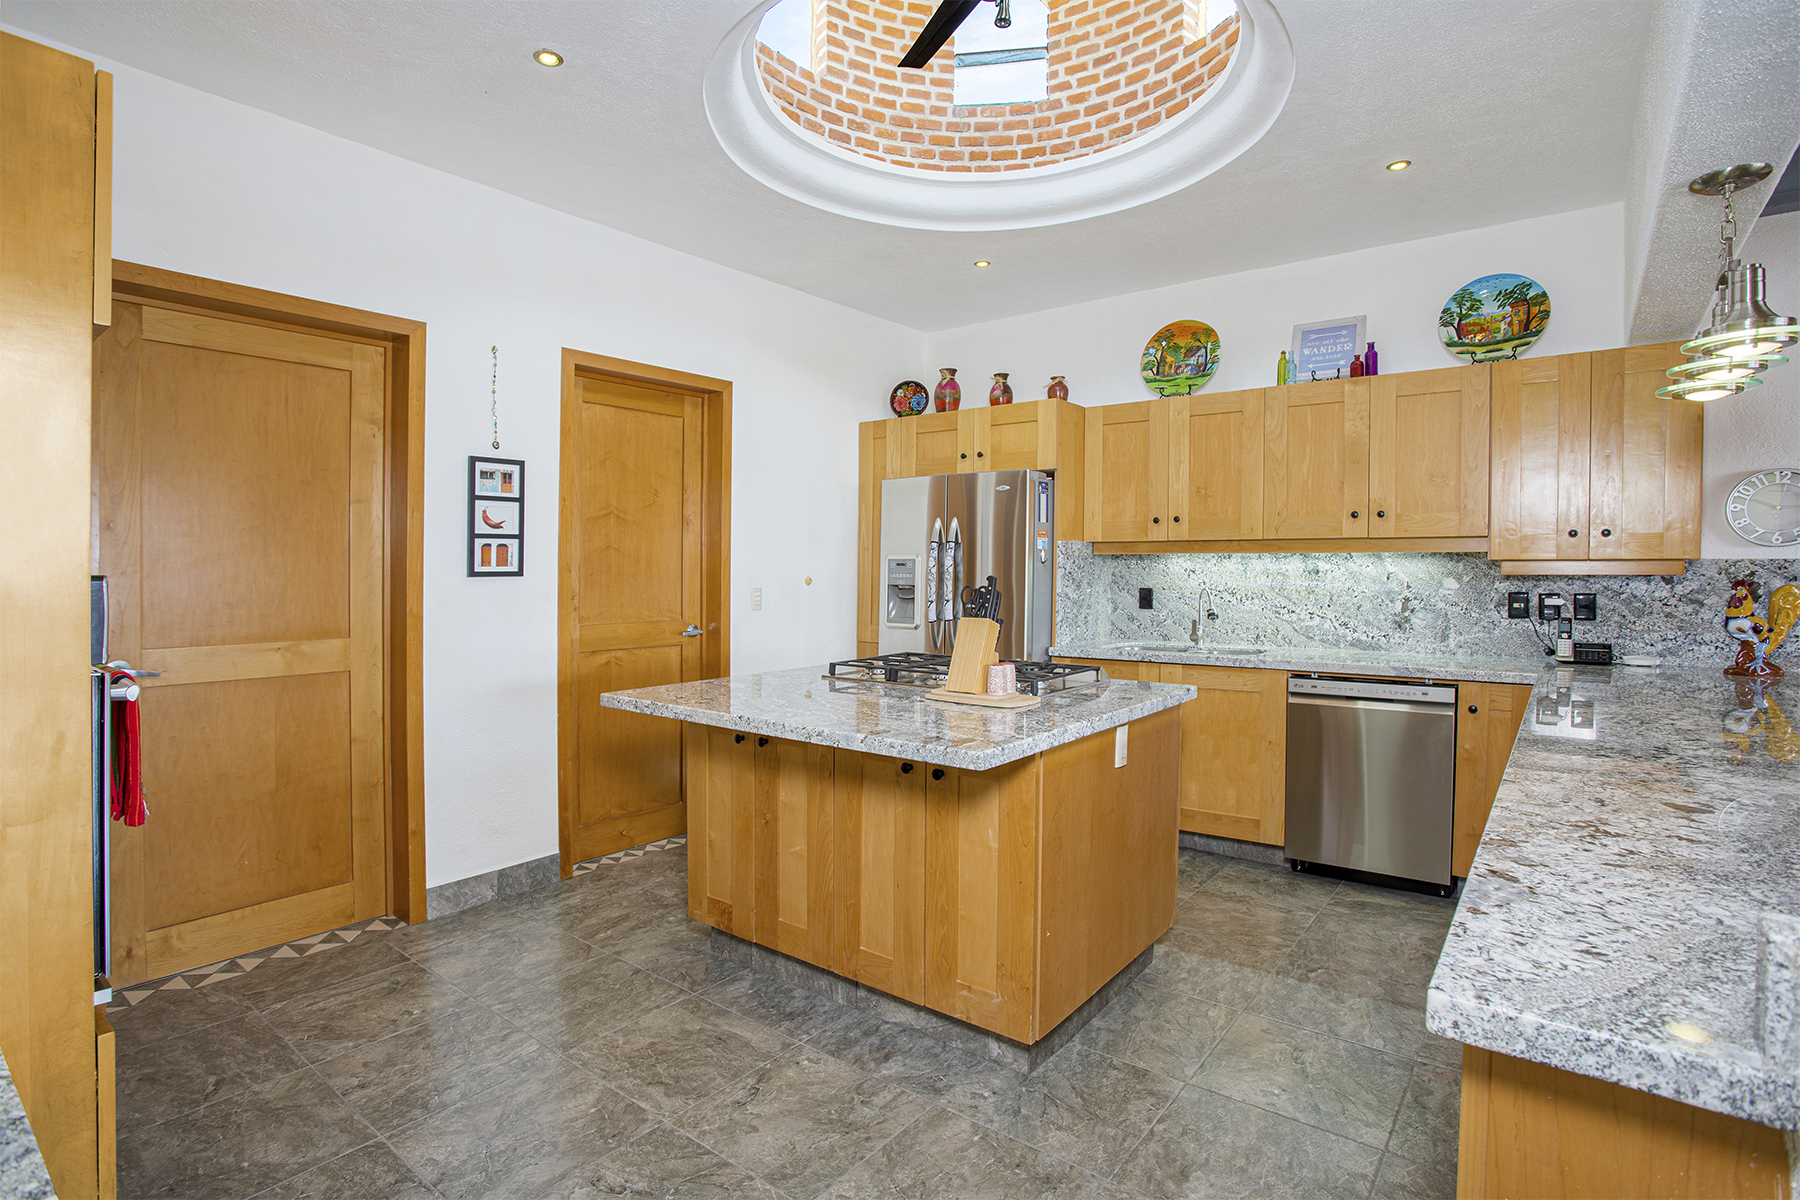 03 Spaious Bright Kitchen with Cupola Dome and New Granite Countertops